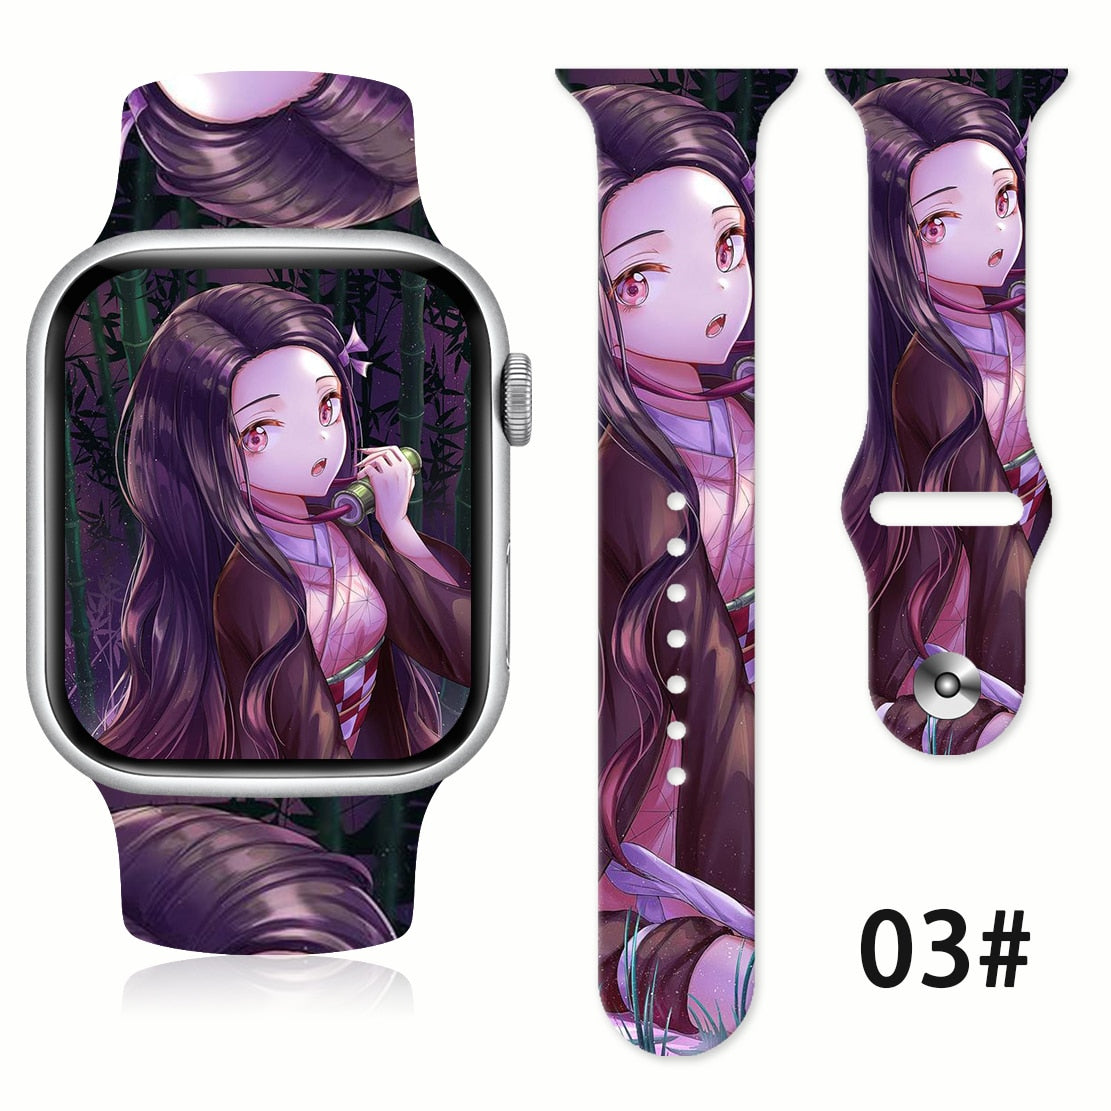 Demon Slayer Strap Band for Apple Watch 03